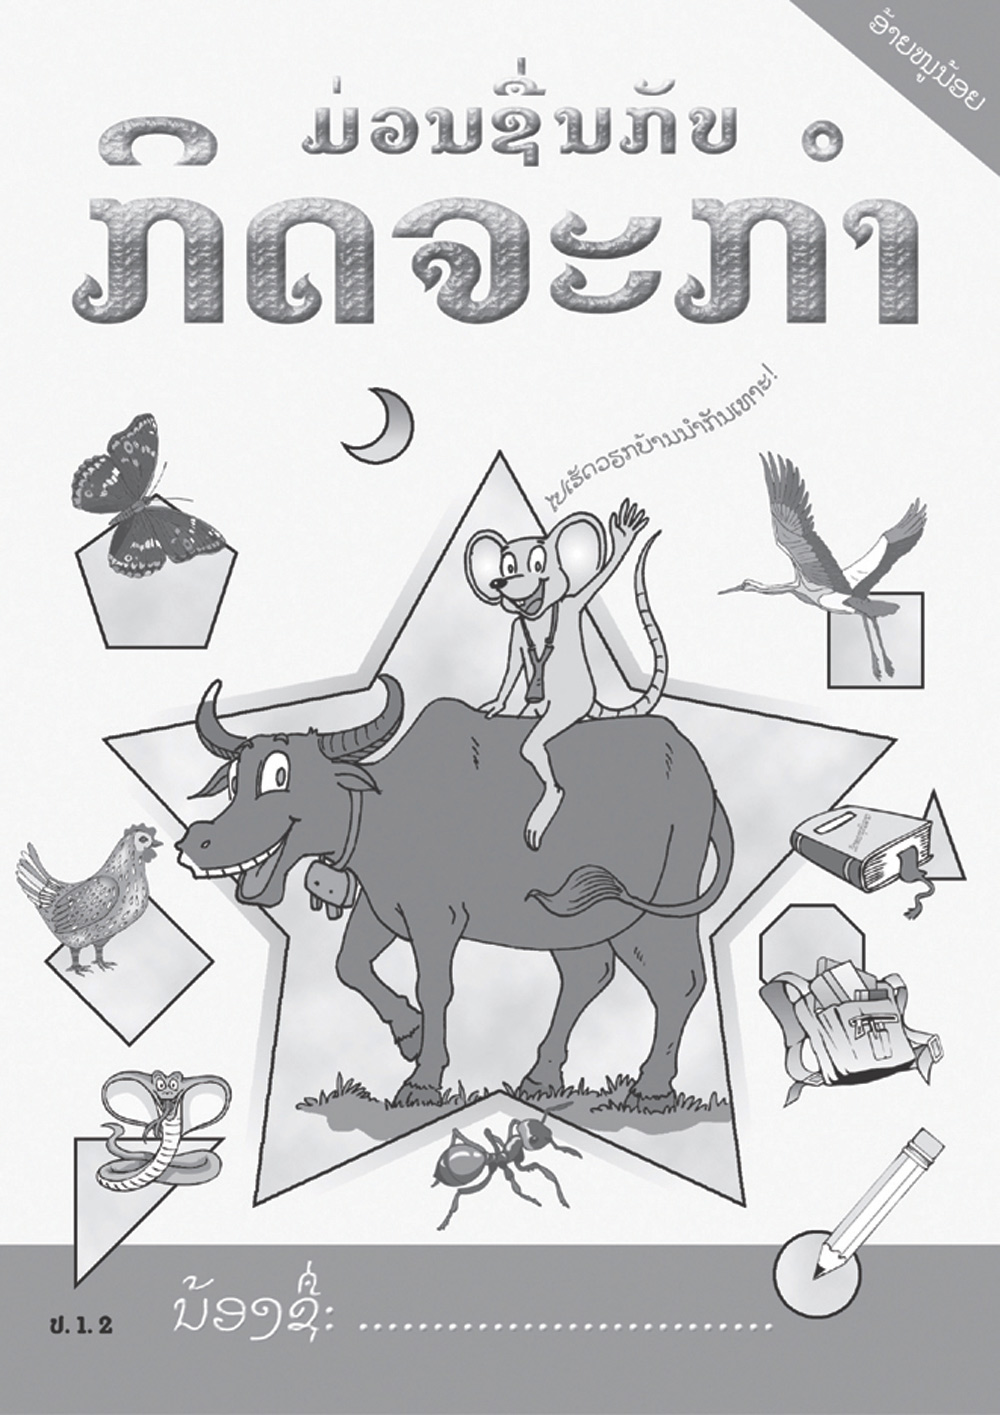 Activity Book Grades 1-2 large book cover, published in Lao language